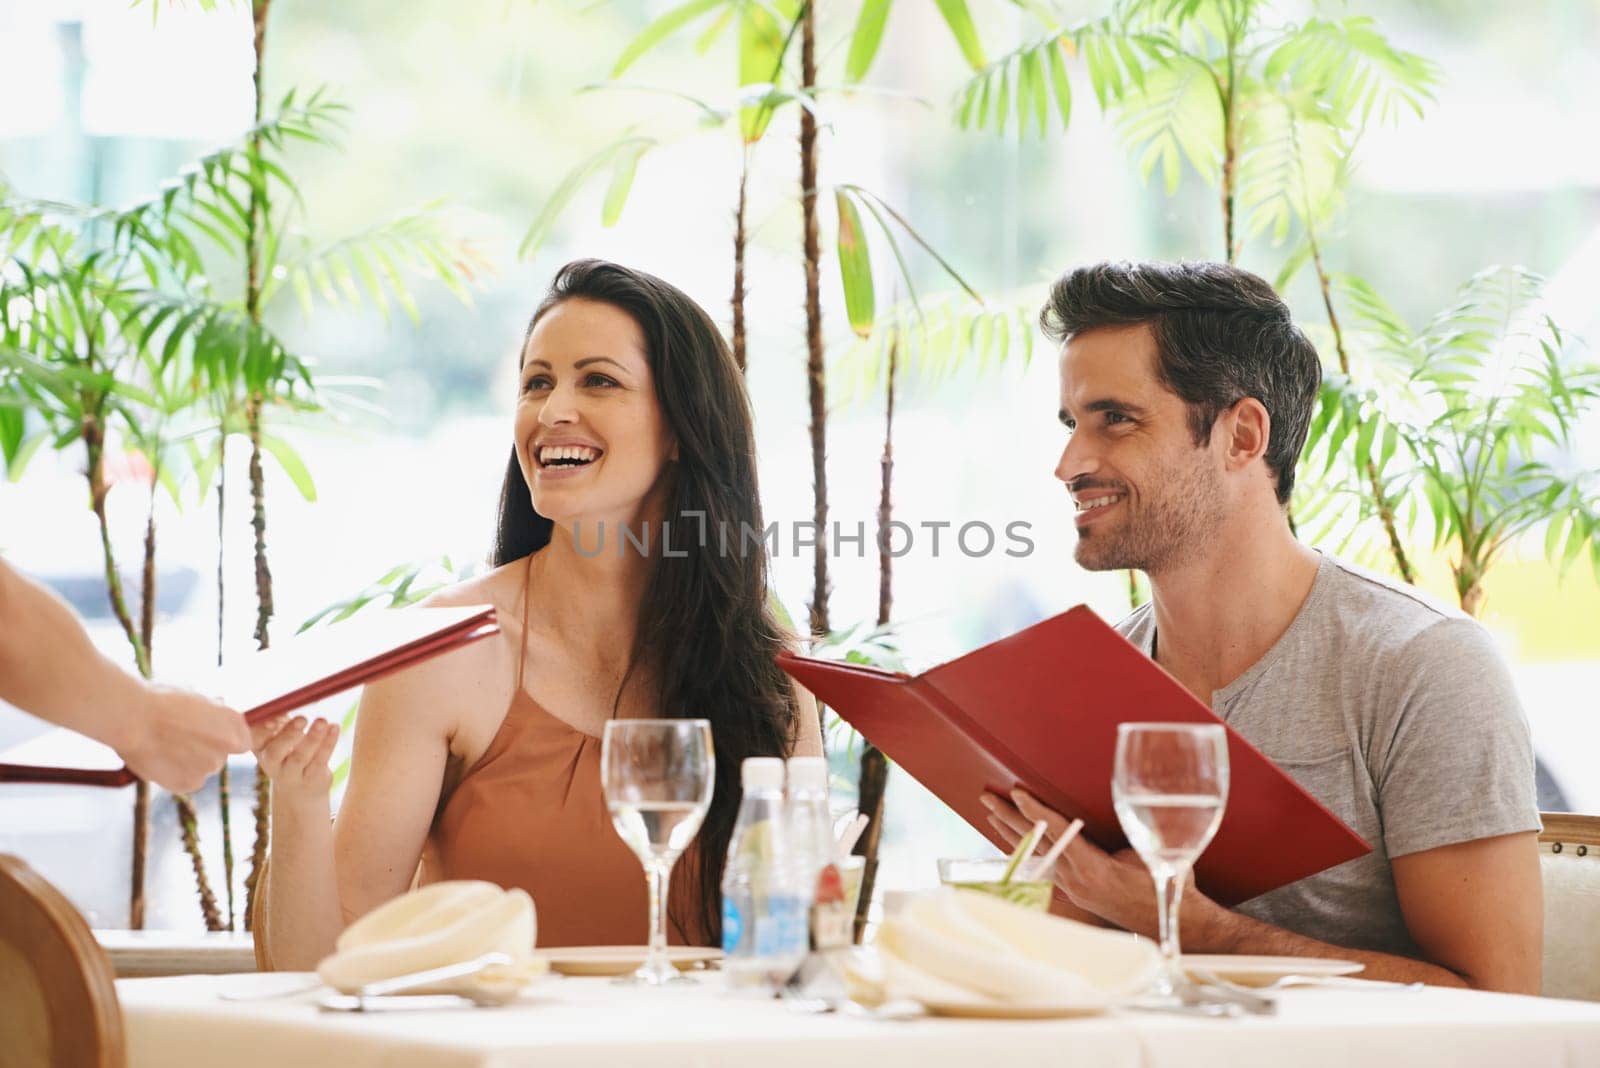 Couple, restaurant and menu with lunch, romance and love for anniversary or celebration. Woman, man and date with luxury, fine dining and smile for relationship on holiday or vacation with meal.